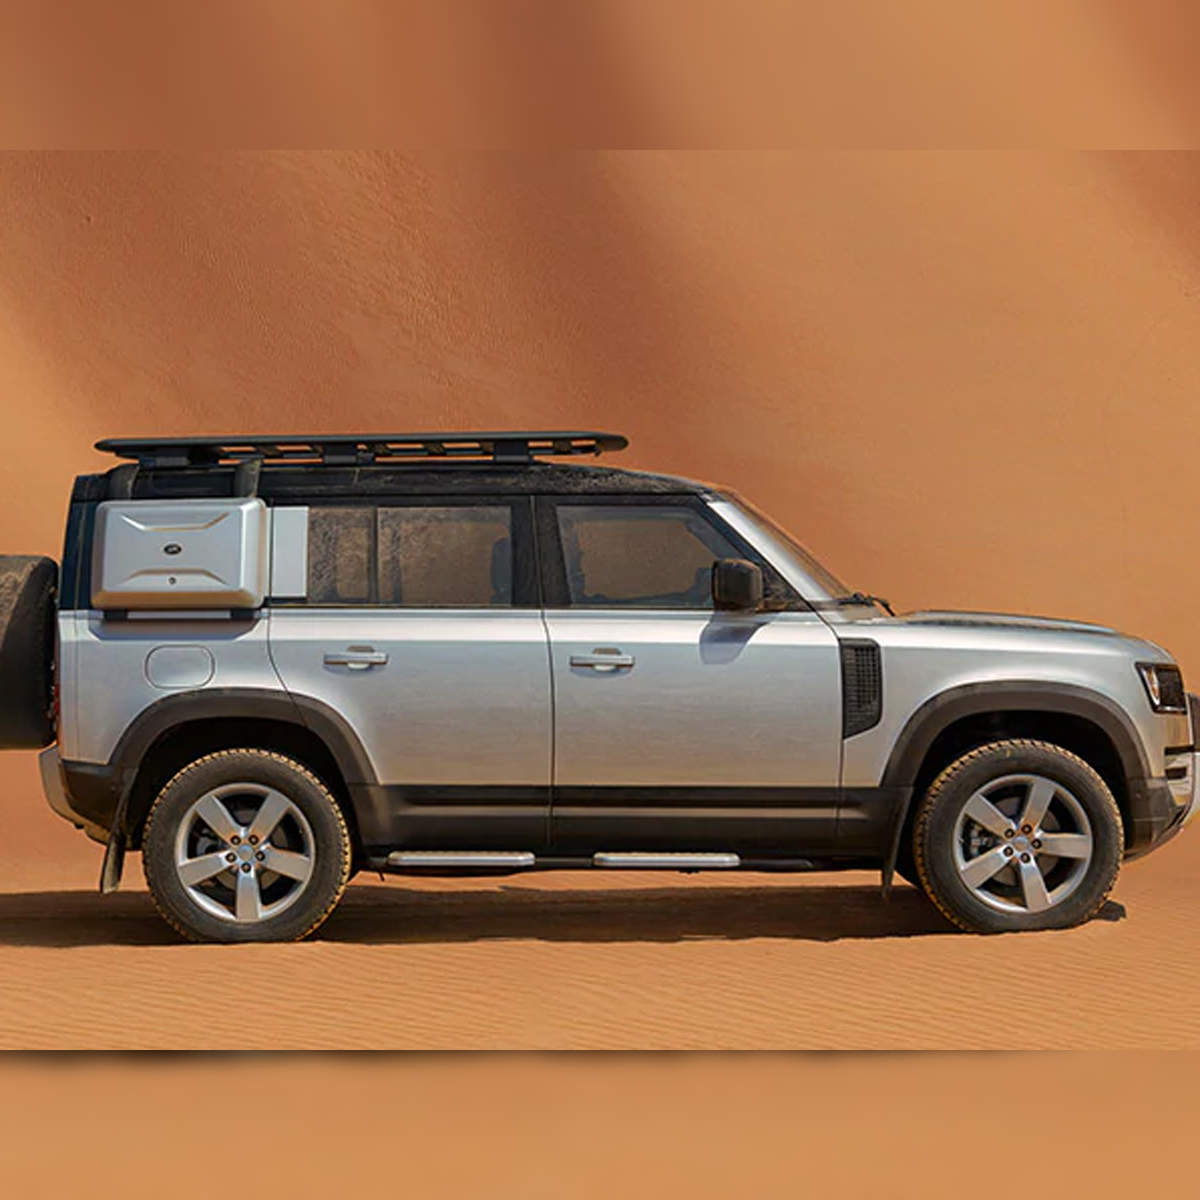 cars and bikes: Vroom, vroom: JLR drives the new Land Rover